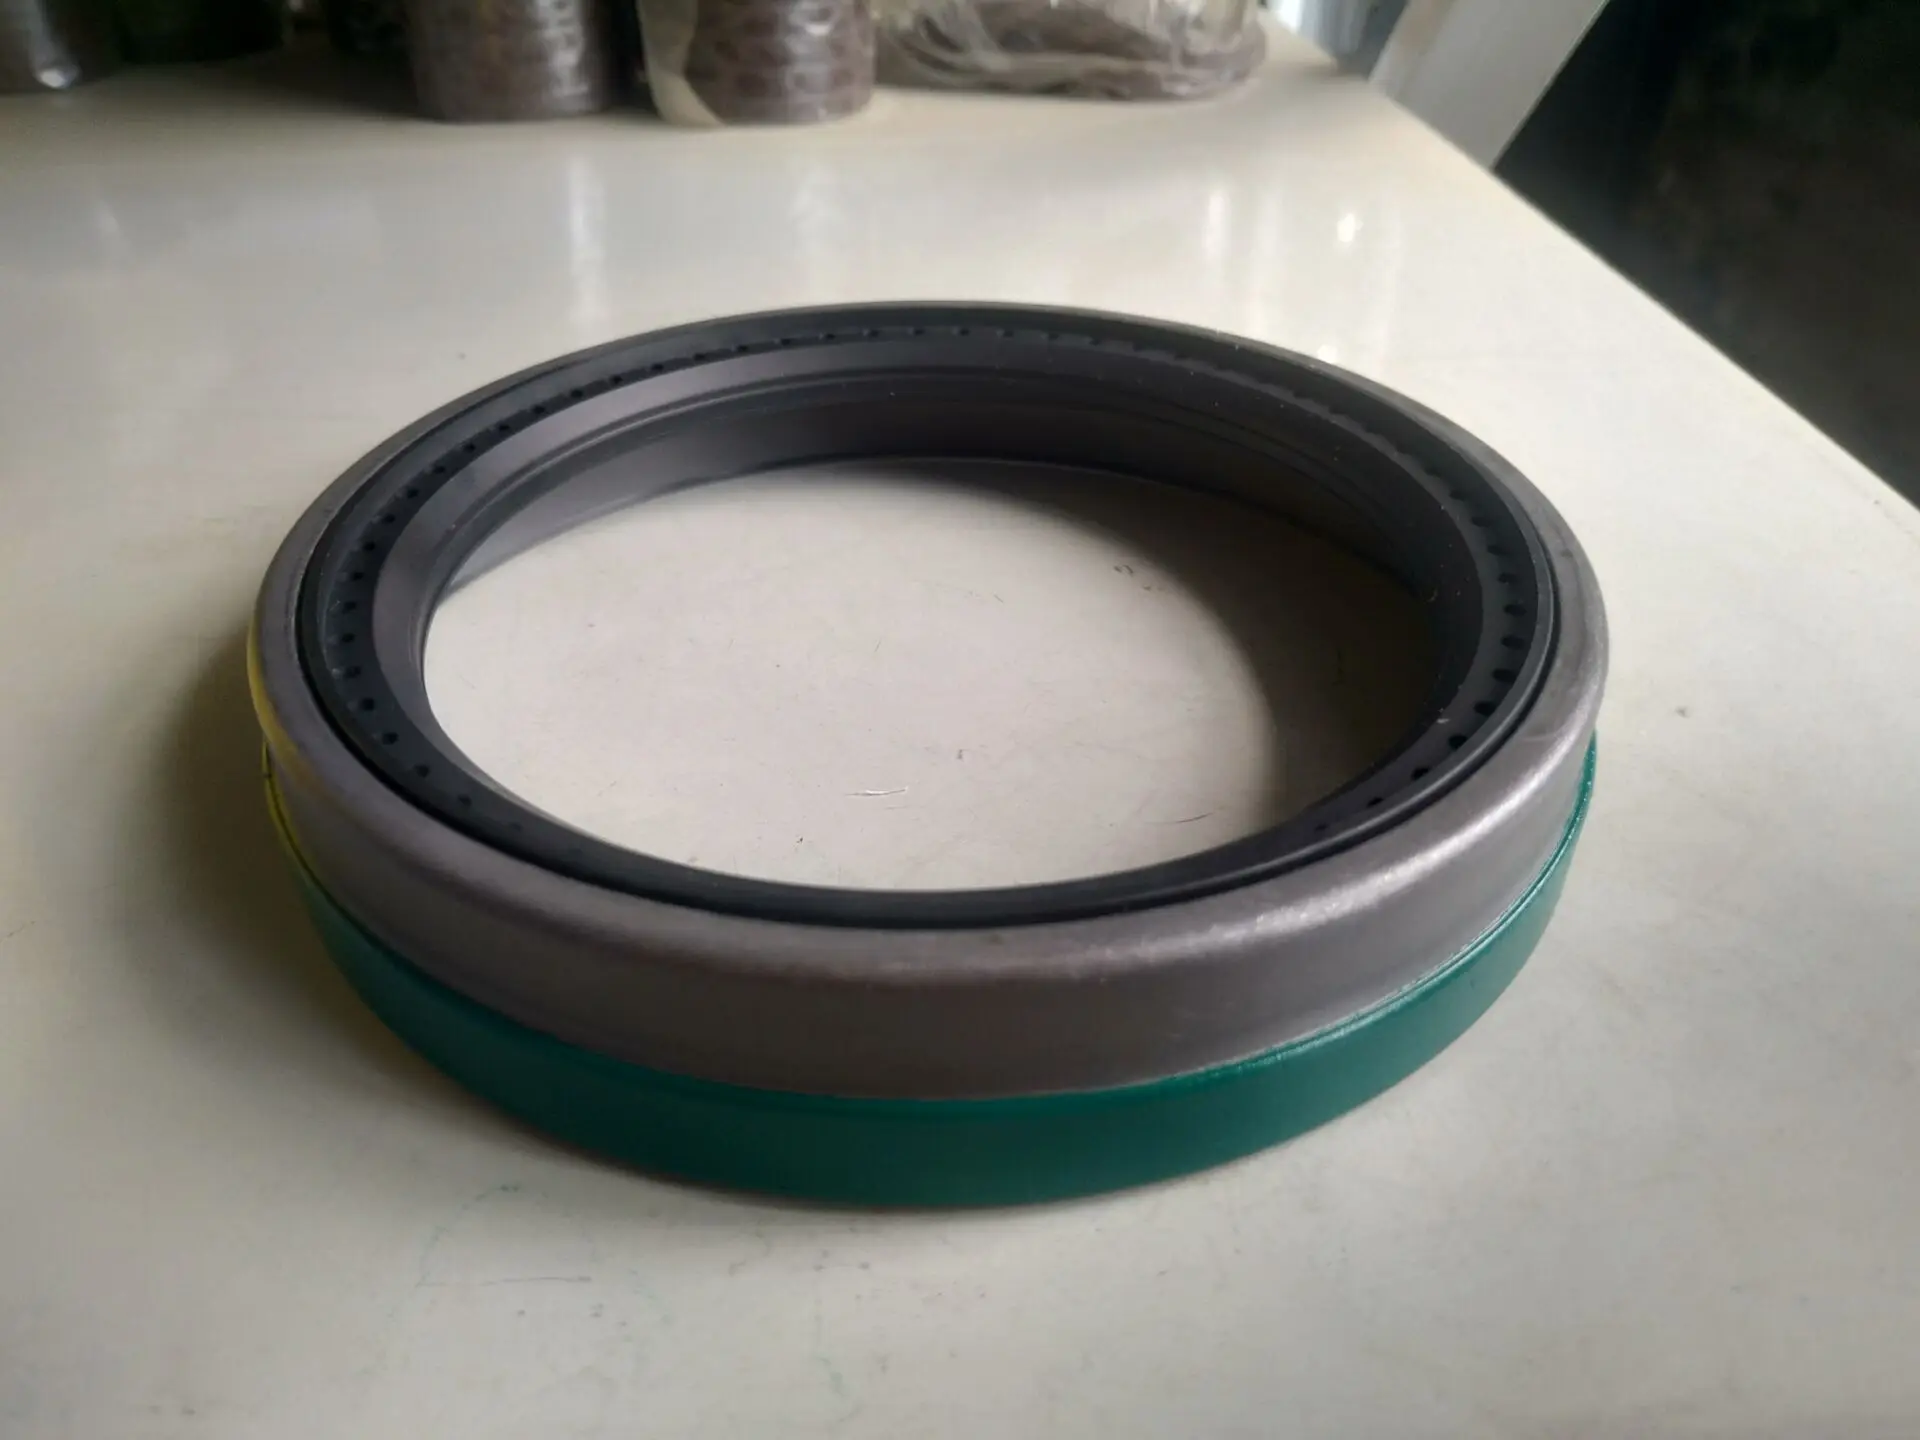 cassette shaft oil seal 107 95 152 629 24 994mm nbr scot1 engineering agricultural machinery seal rwdr kombi iso 9001 2008 Cassette Shaft Oil Seal 88.9*122.987*22.936mm NBR SCOT1 Engineering Agricultural Machinery Seal RWDR-KOMBI ISO 9001:2008